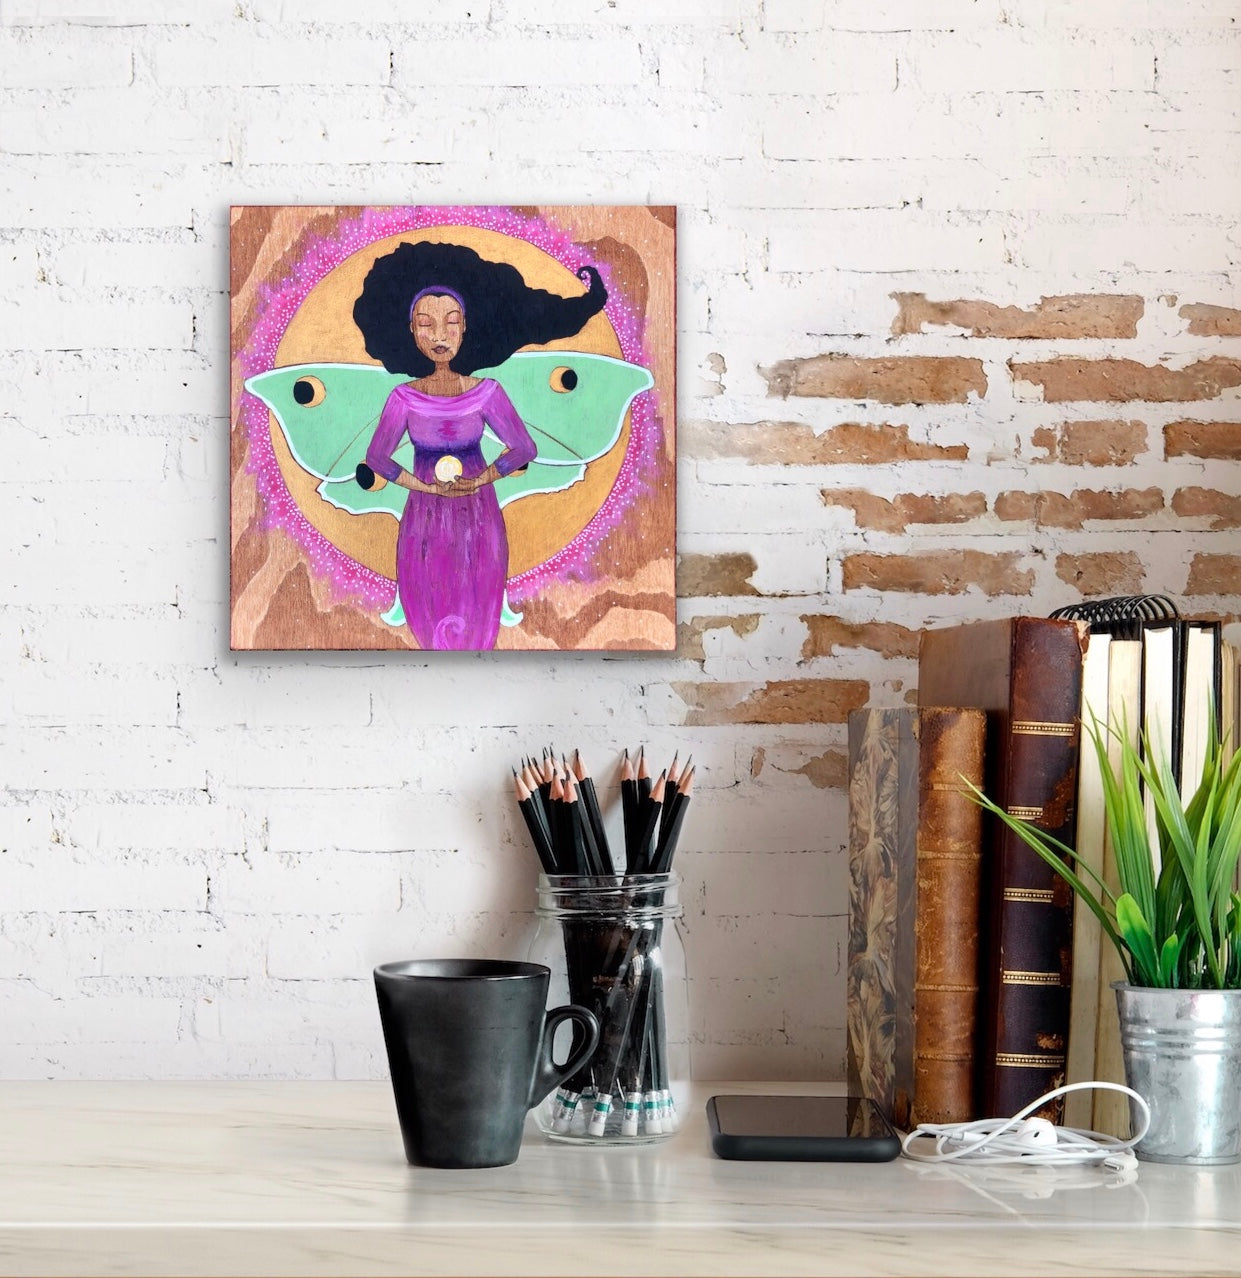 Art print hanging on a brick wall above books, pencils and other items on a desk.  The print by Portland artist Lea K. Tawd portrays a Black woman with wings of a Luna moth and a full moon behind her. 